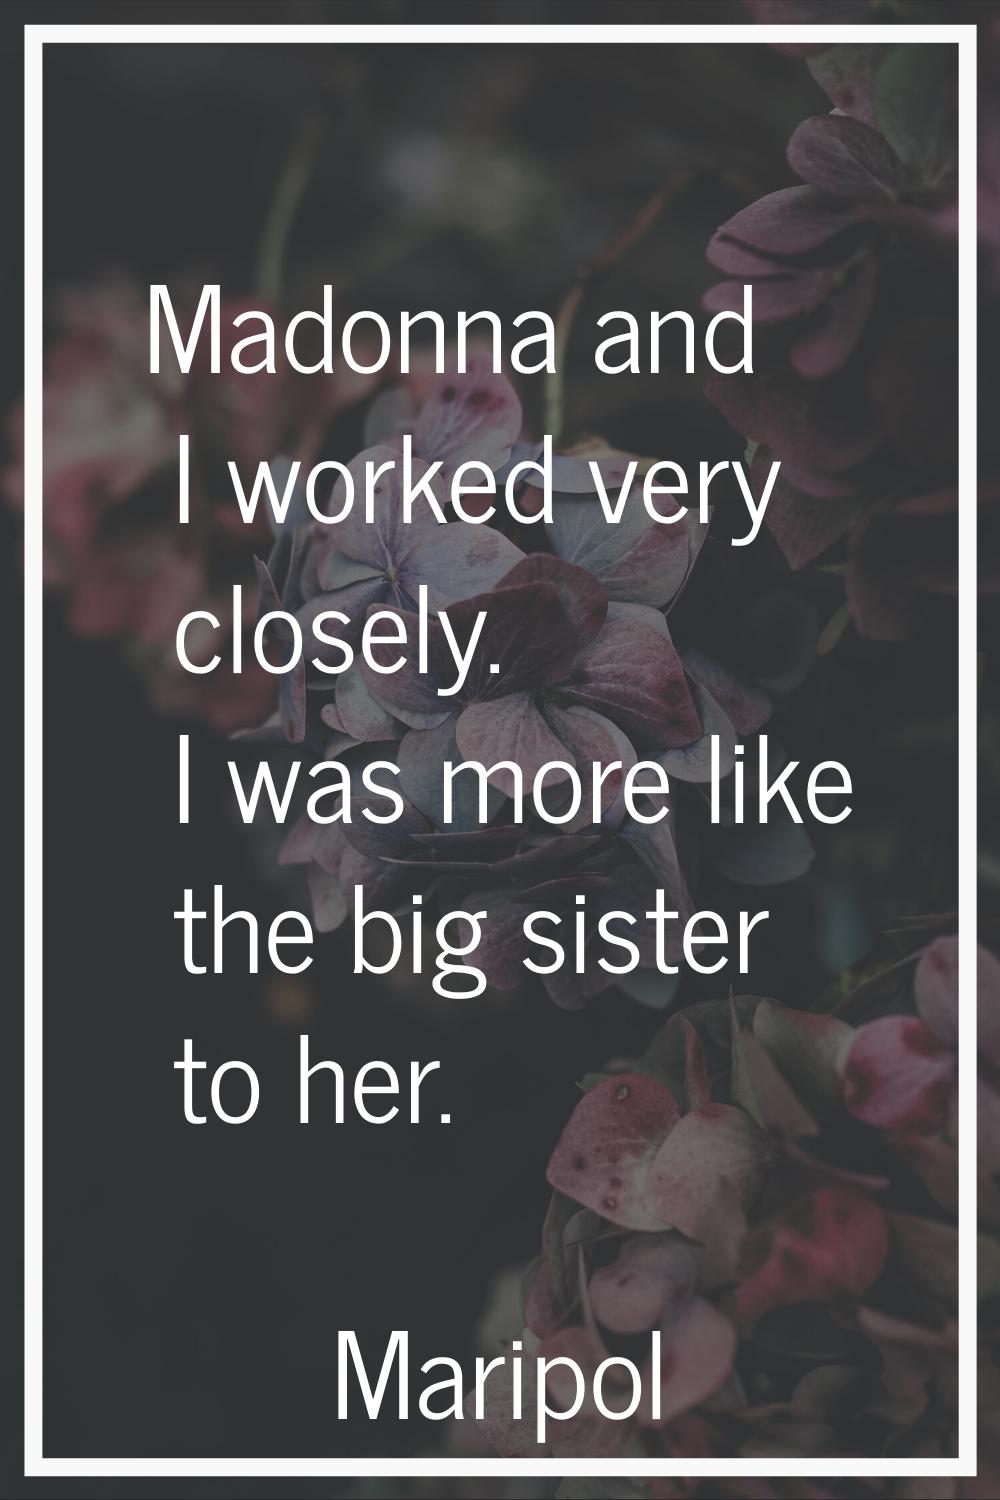 Madonna and I worked very closely. I was more like the big sister to her.